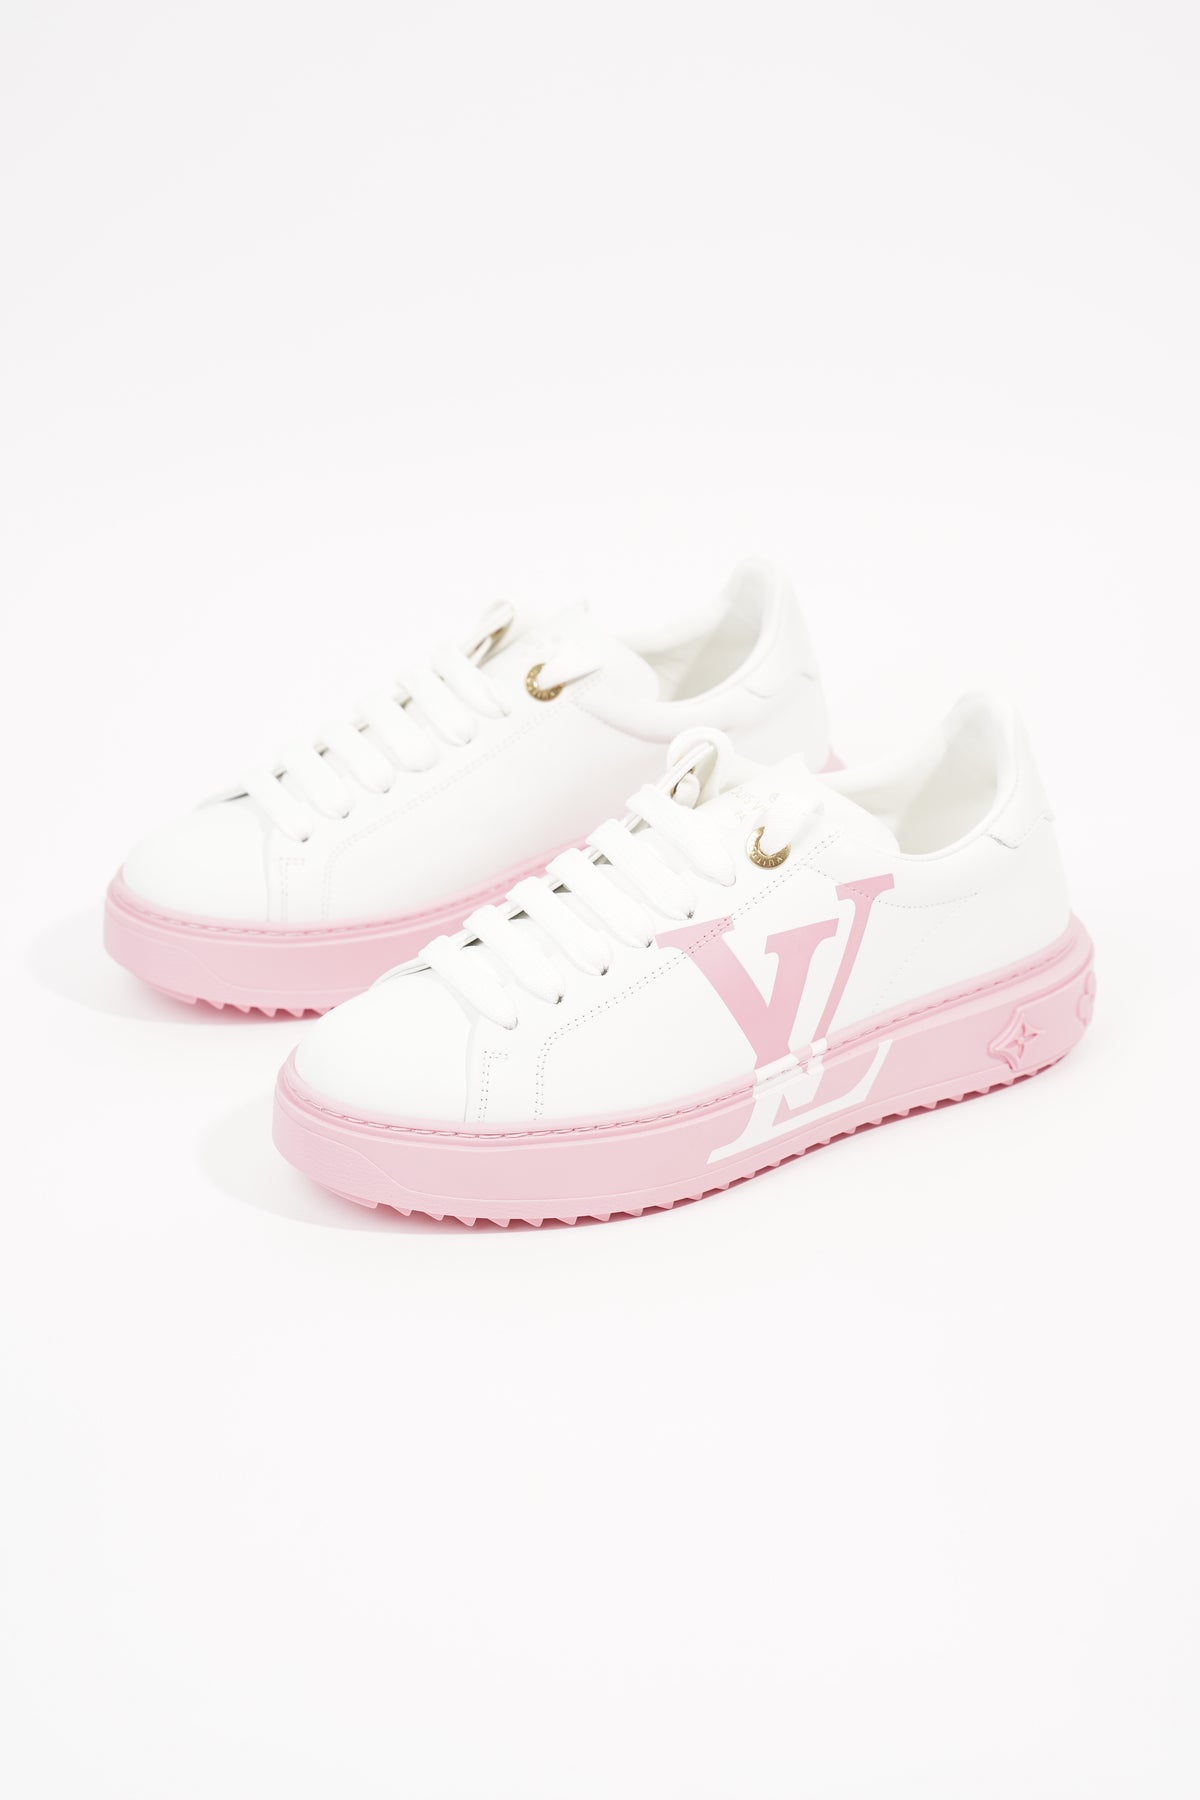 Louis Vuitton Time Out Sneaker, Pink, 40.5